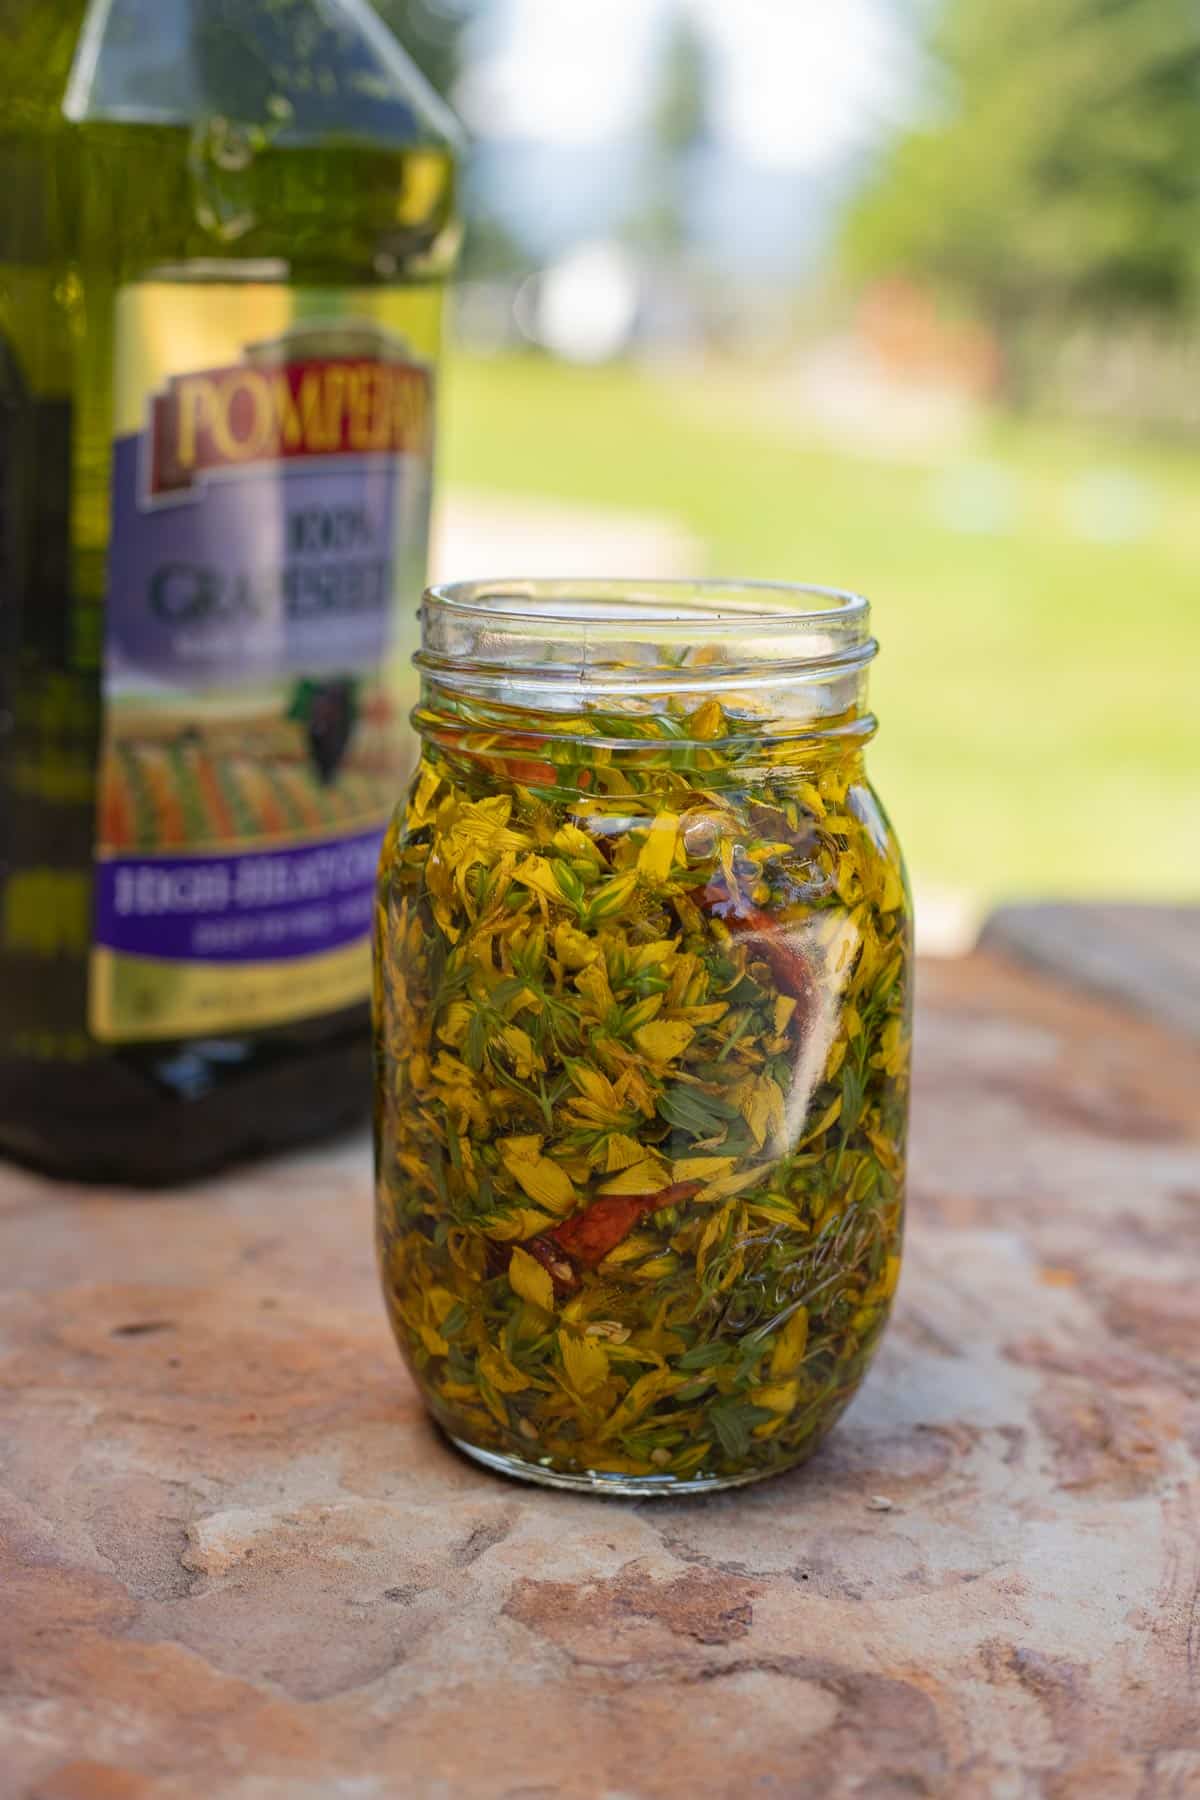 st john's wort oil in a jar with oil behind it